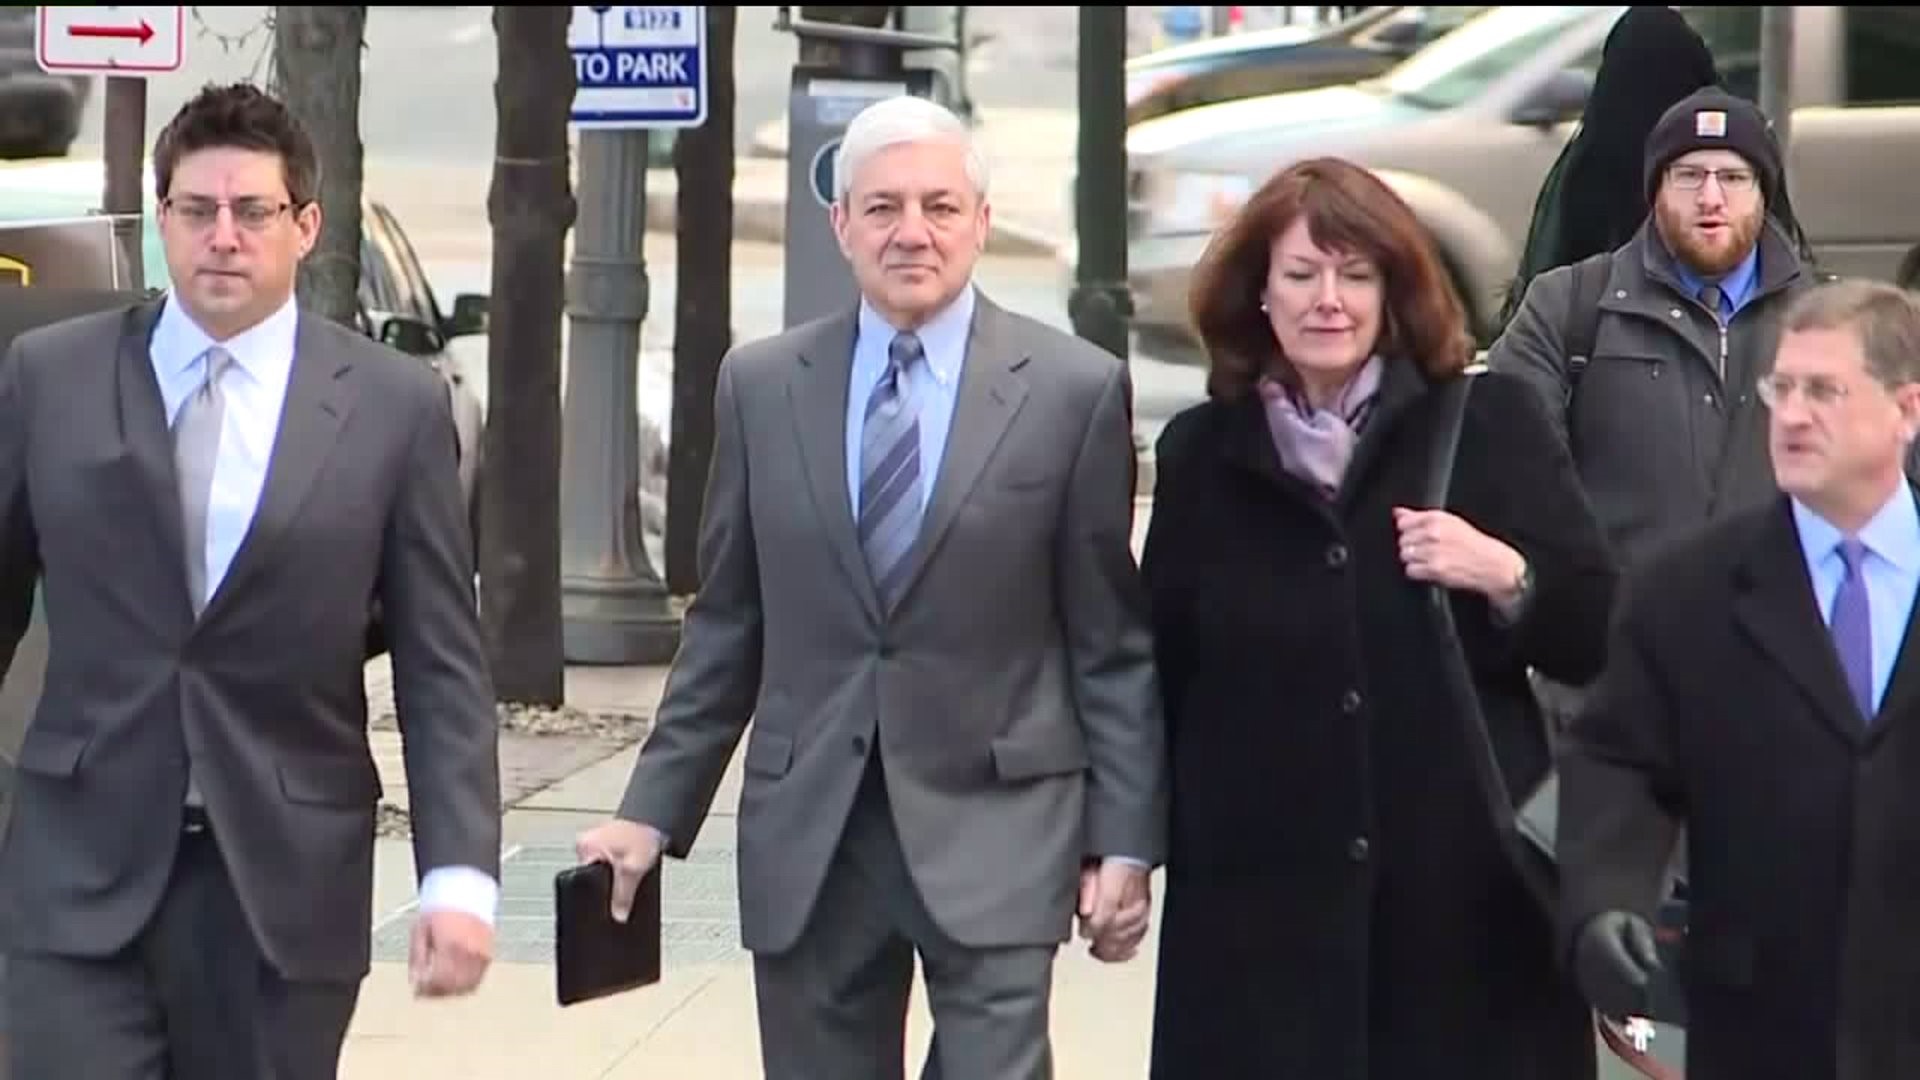 Penn State Students React to Former President`s Child Endangerment Conviction Being Thrown Out